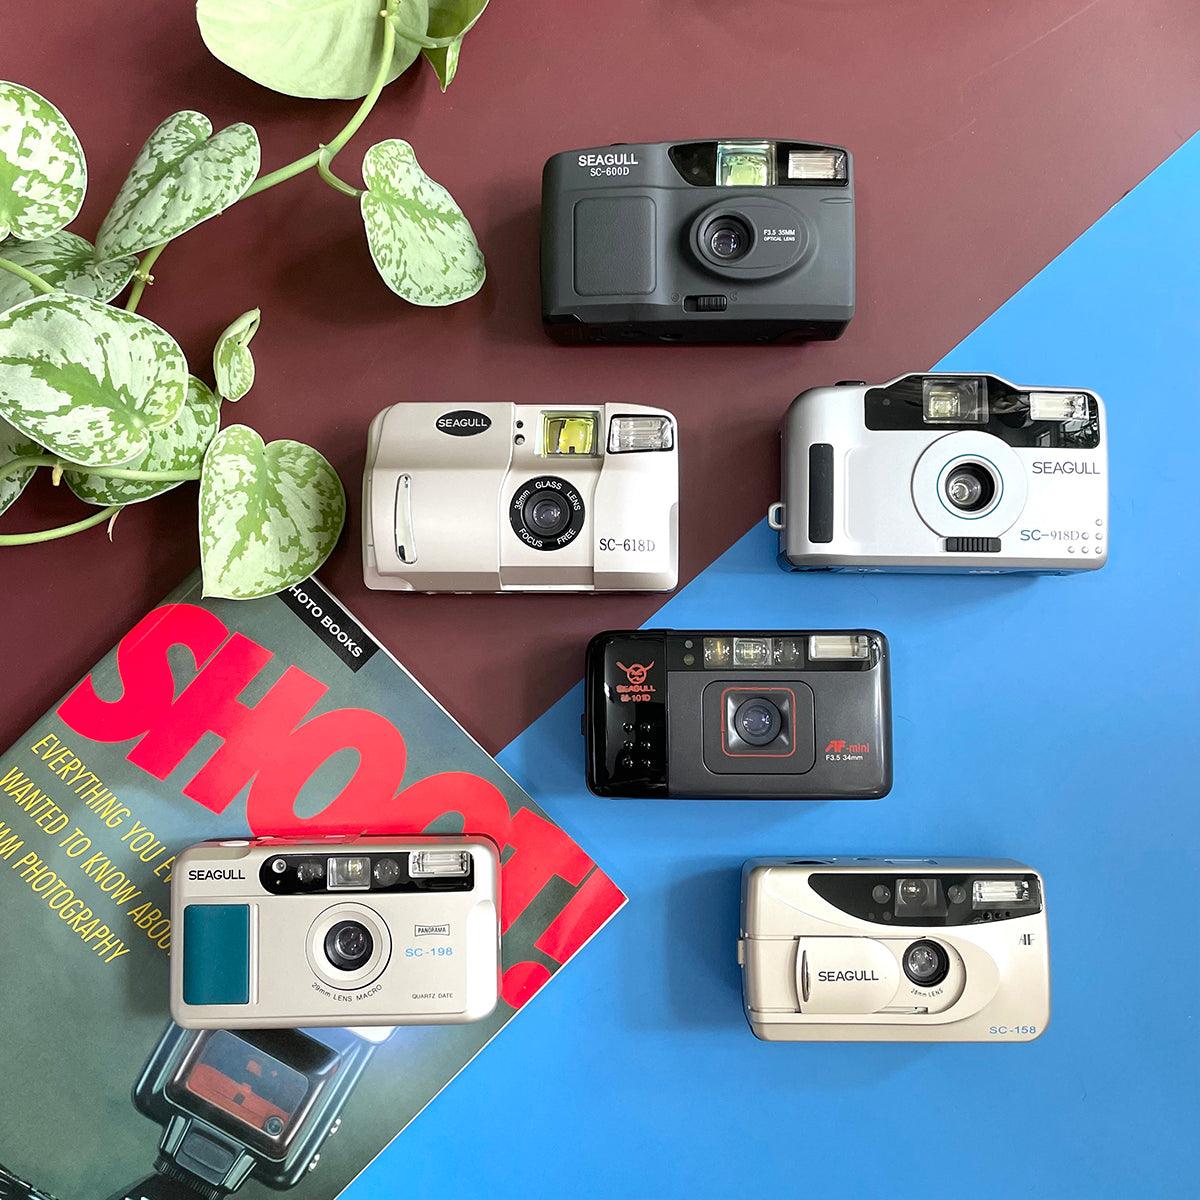 Film Cameras – tagged Instant – Page 3 – 8storeytree